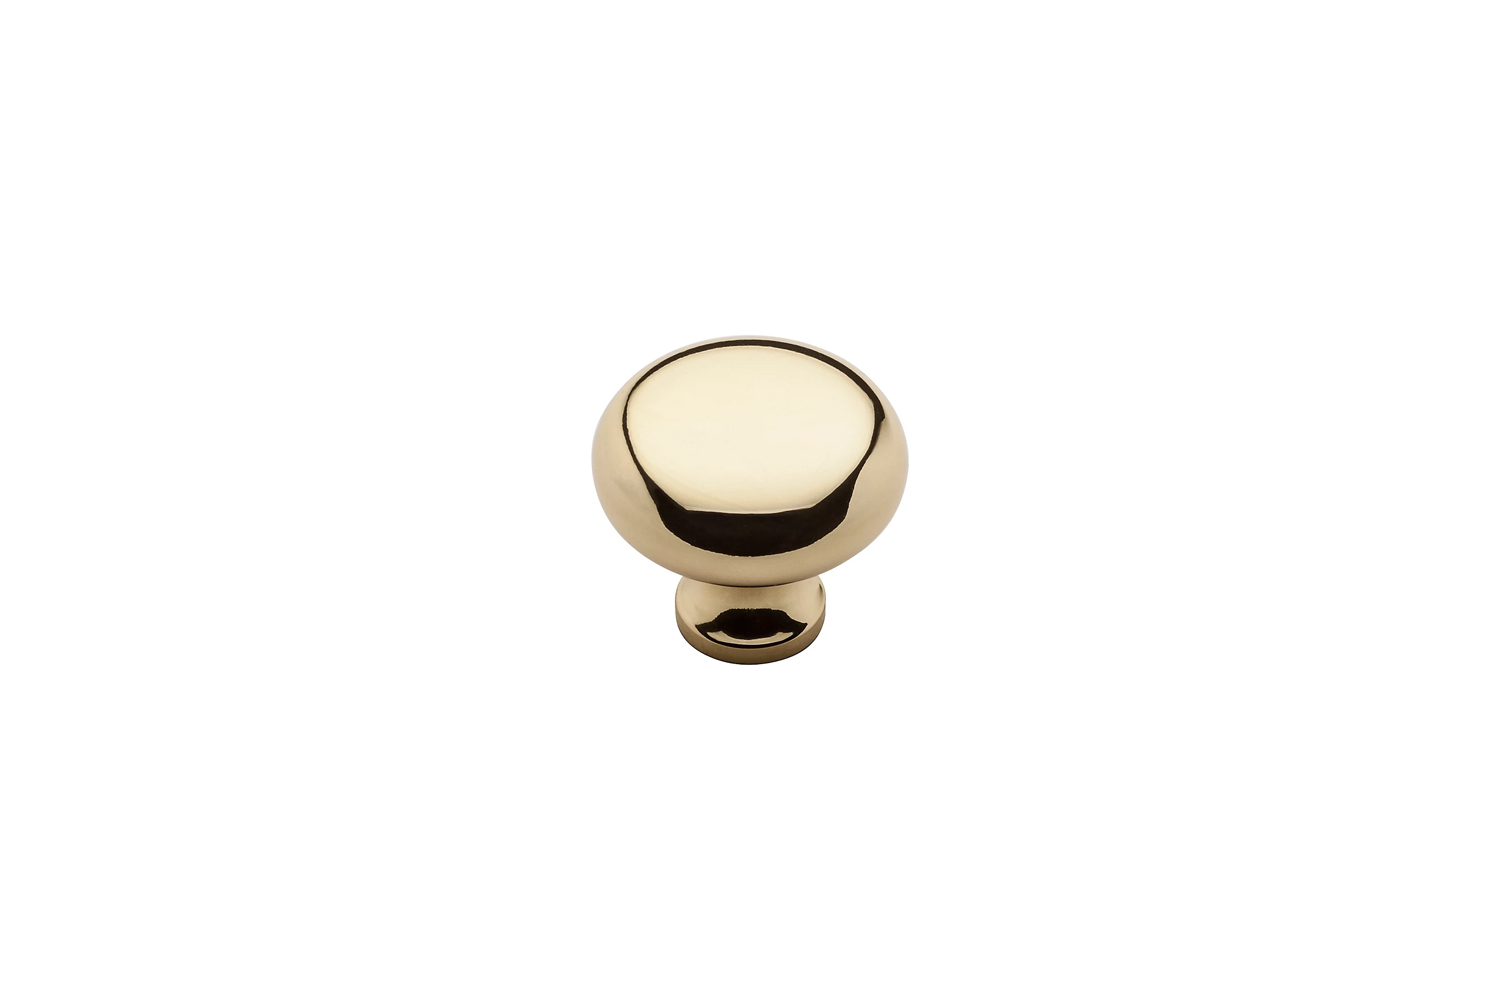 the baldwin classic \1 \1/4 inch mushroom cabinet knob comes in polished or sat 13